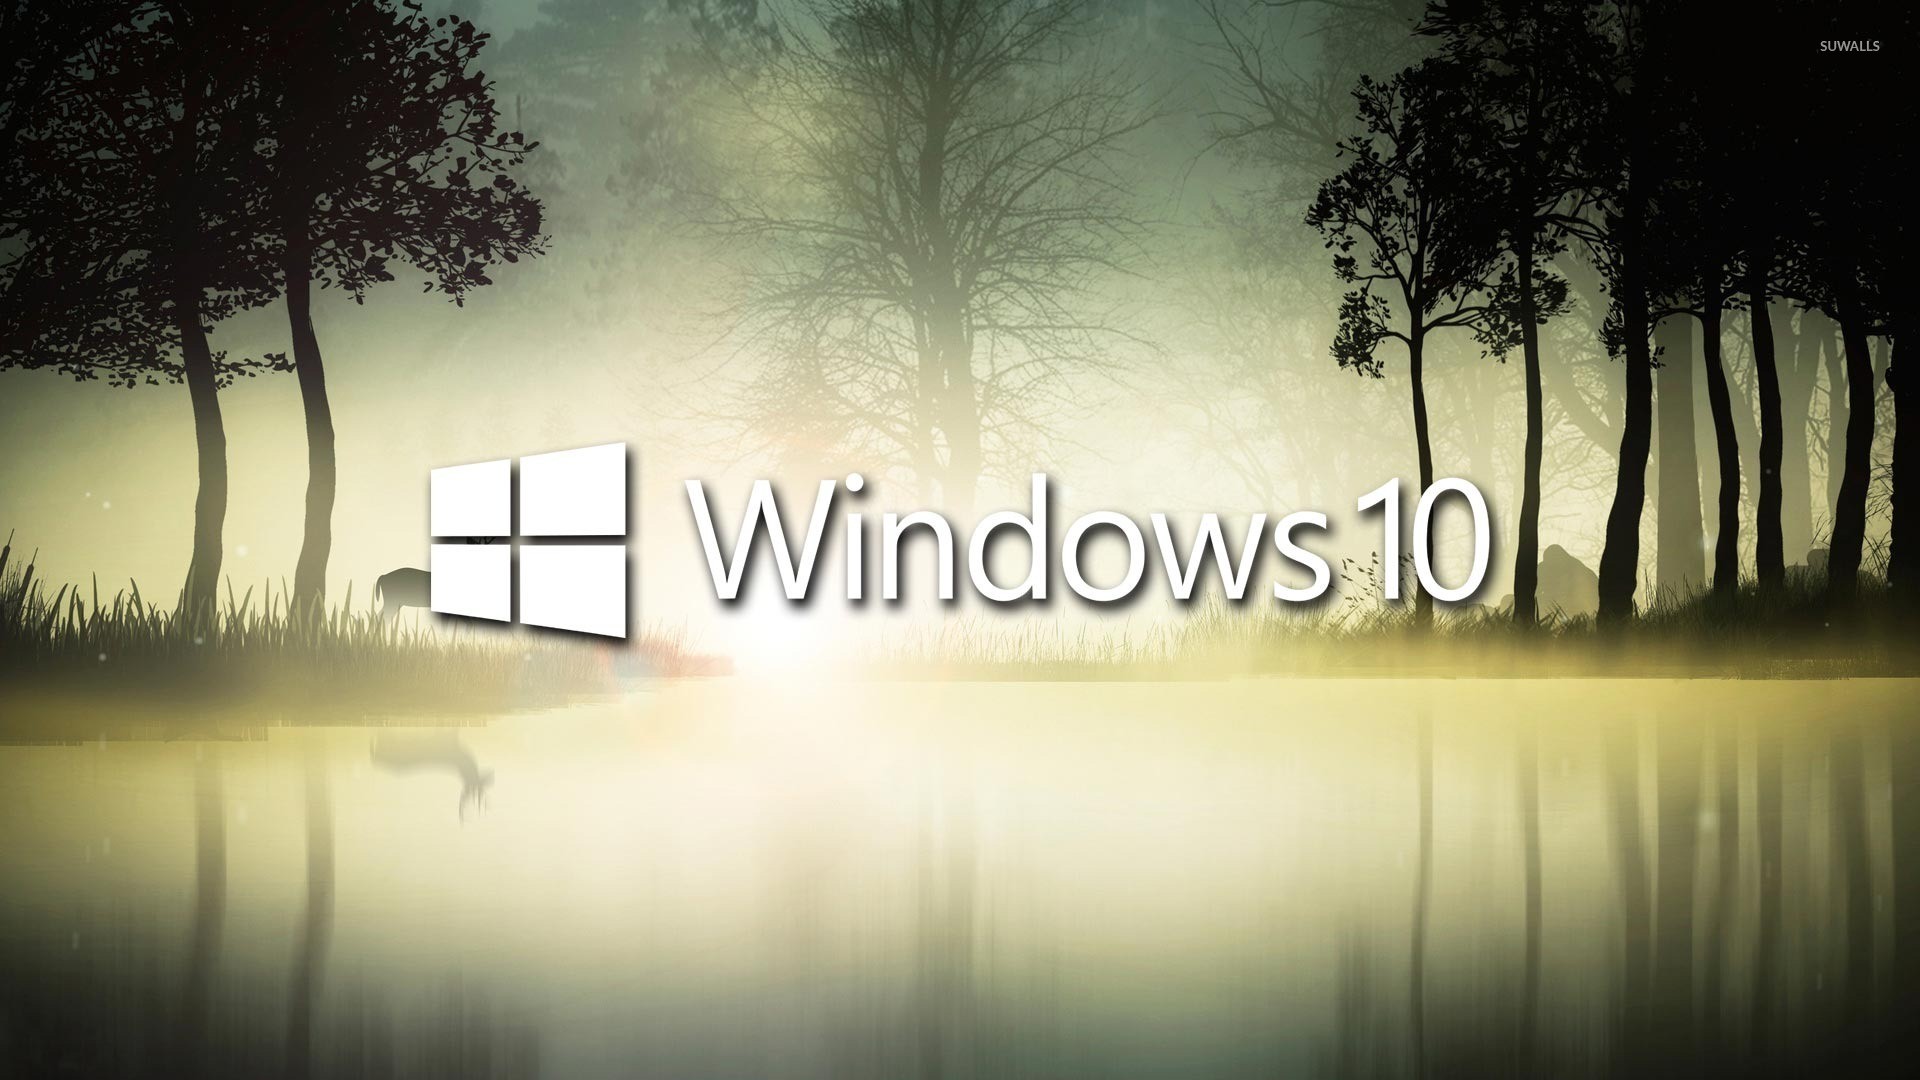 1920x1080 Windows 10 in the foggy forest wallpaper